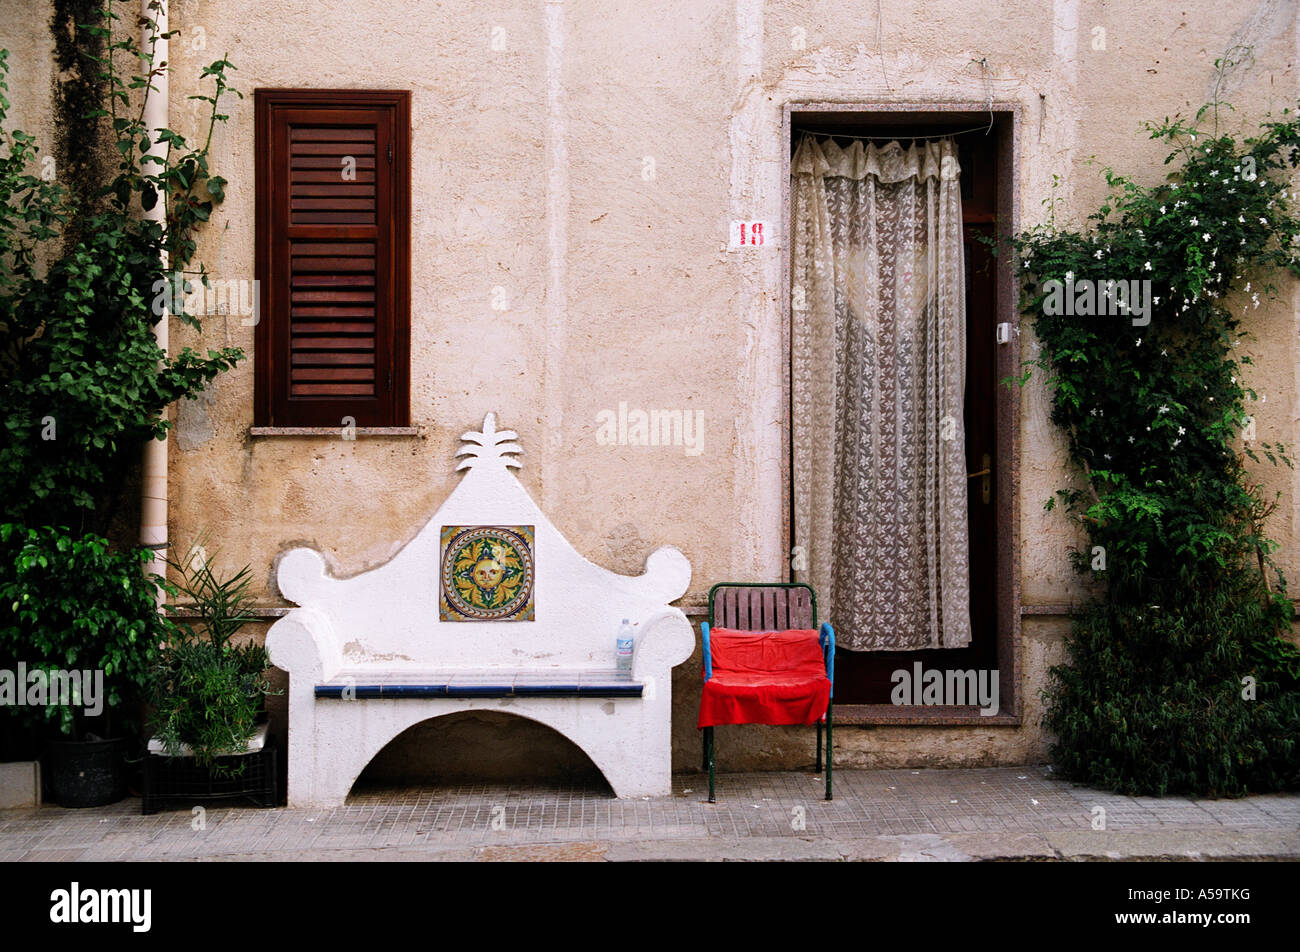 A view of a bench and chair outside the front of a home.  Net curtain in doorway. Wooden shutter. Climbing plant on the wall Stock Photo